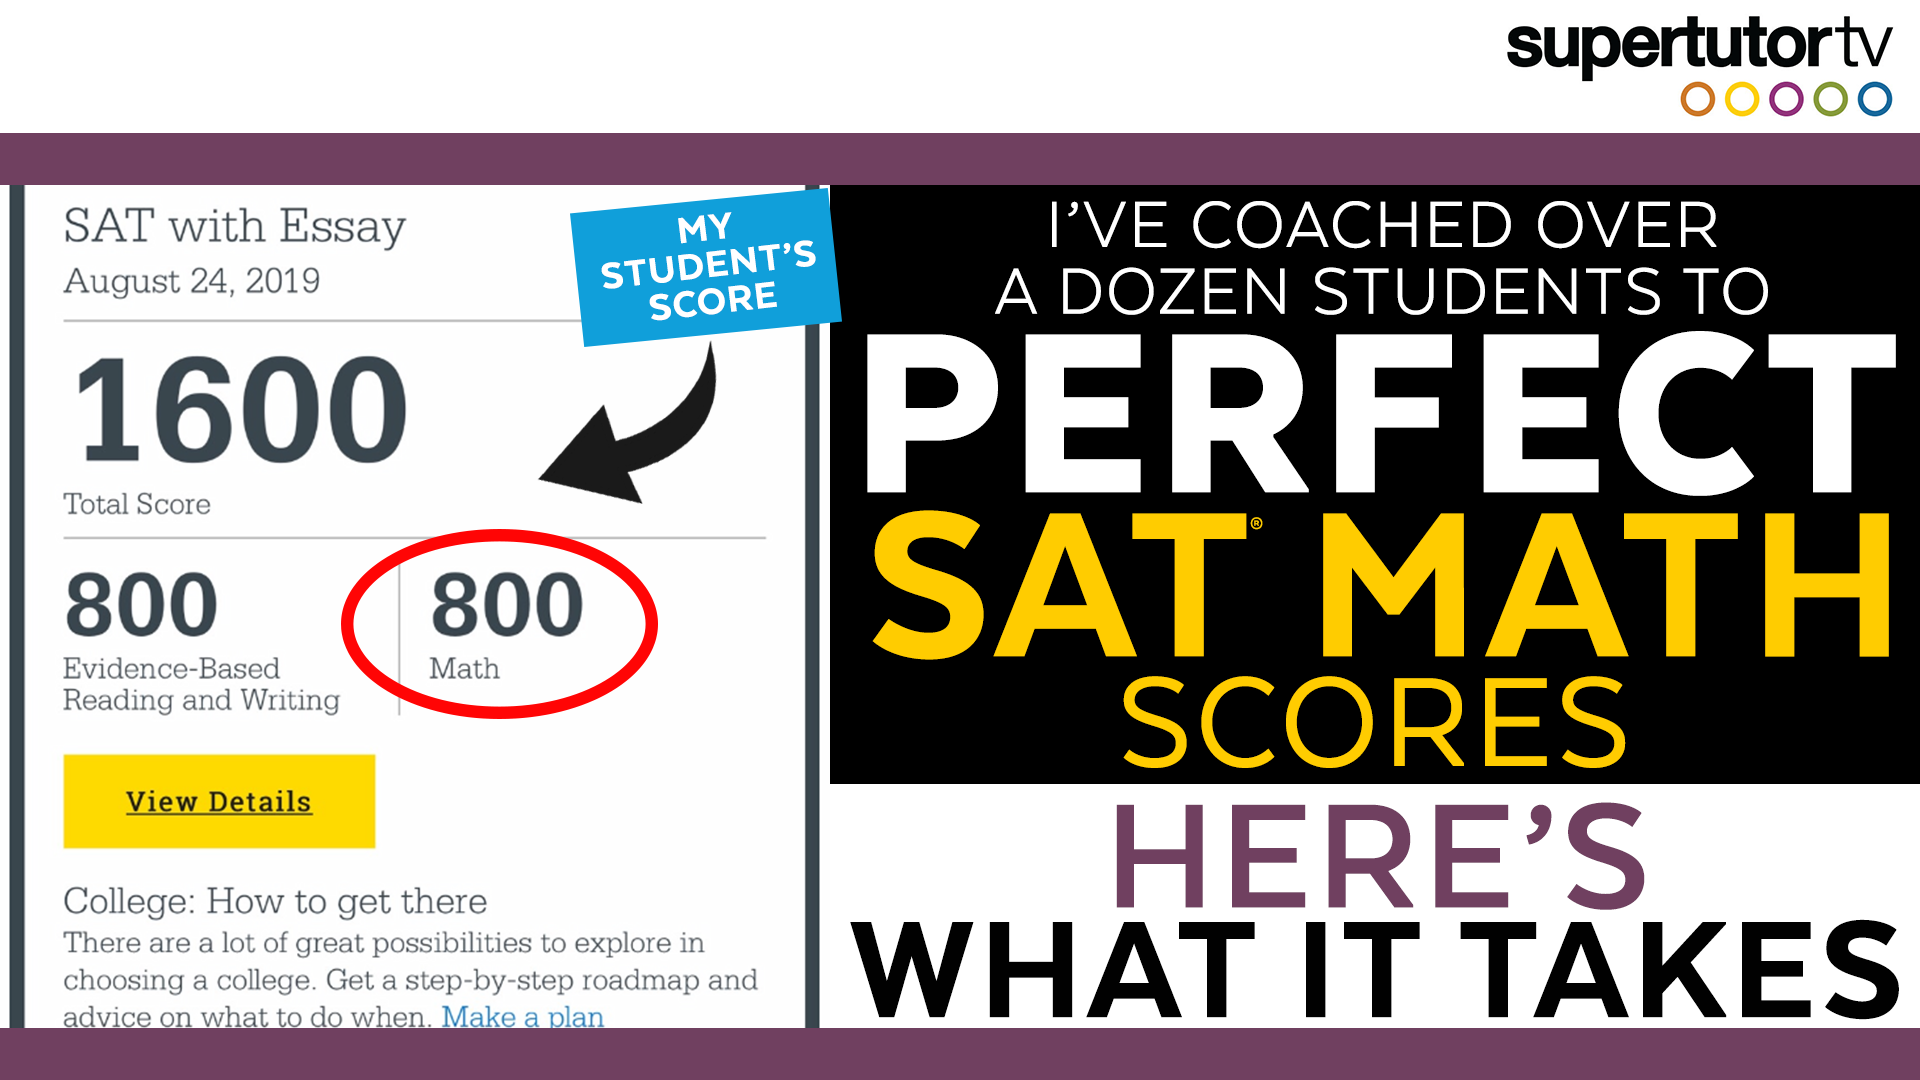 I've Coached Dozens of Students to Perfect SAT Math Scores Here's What